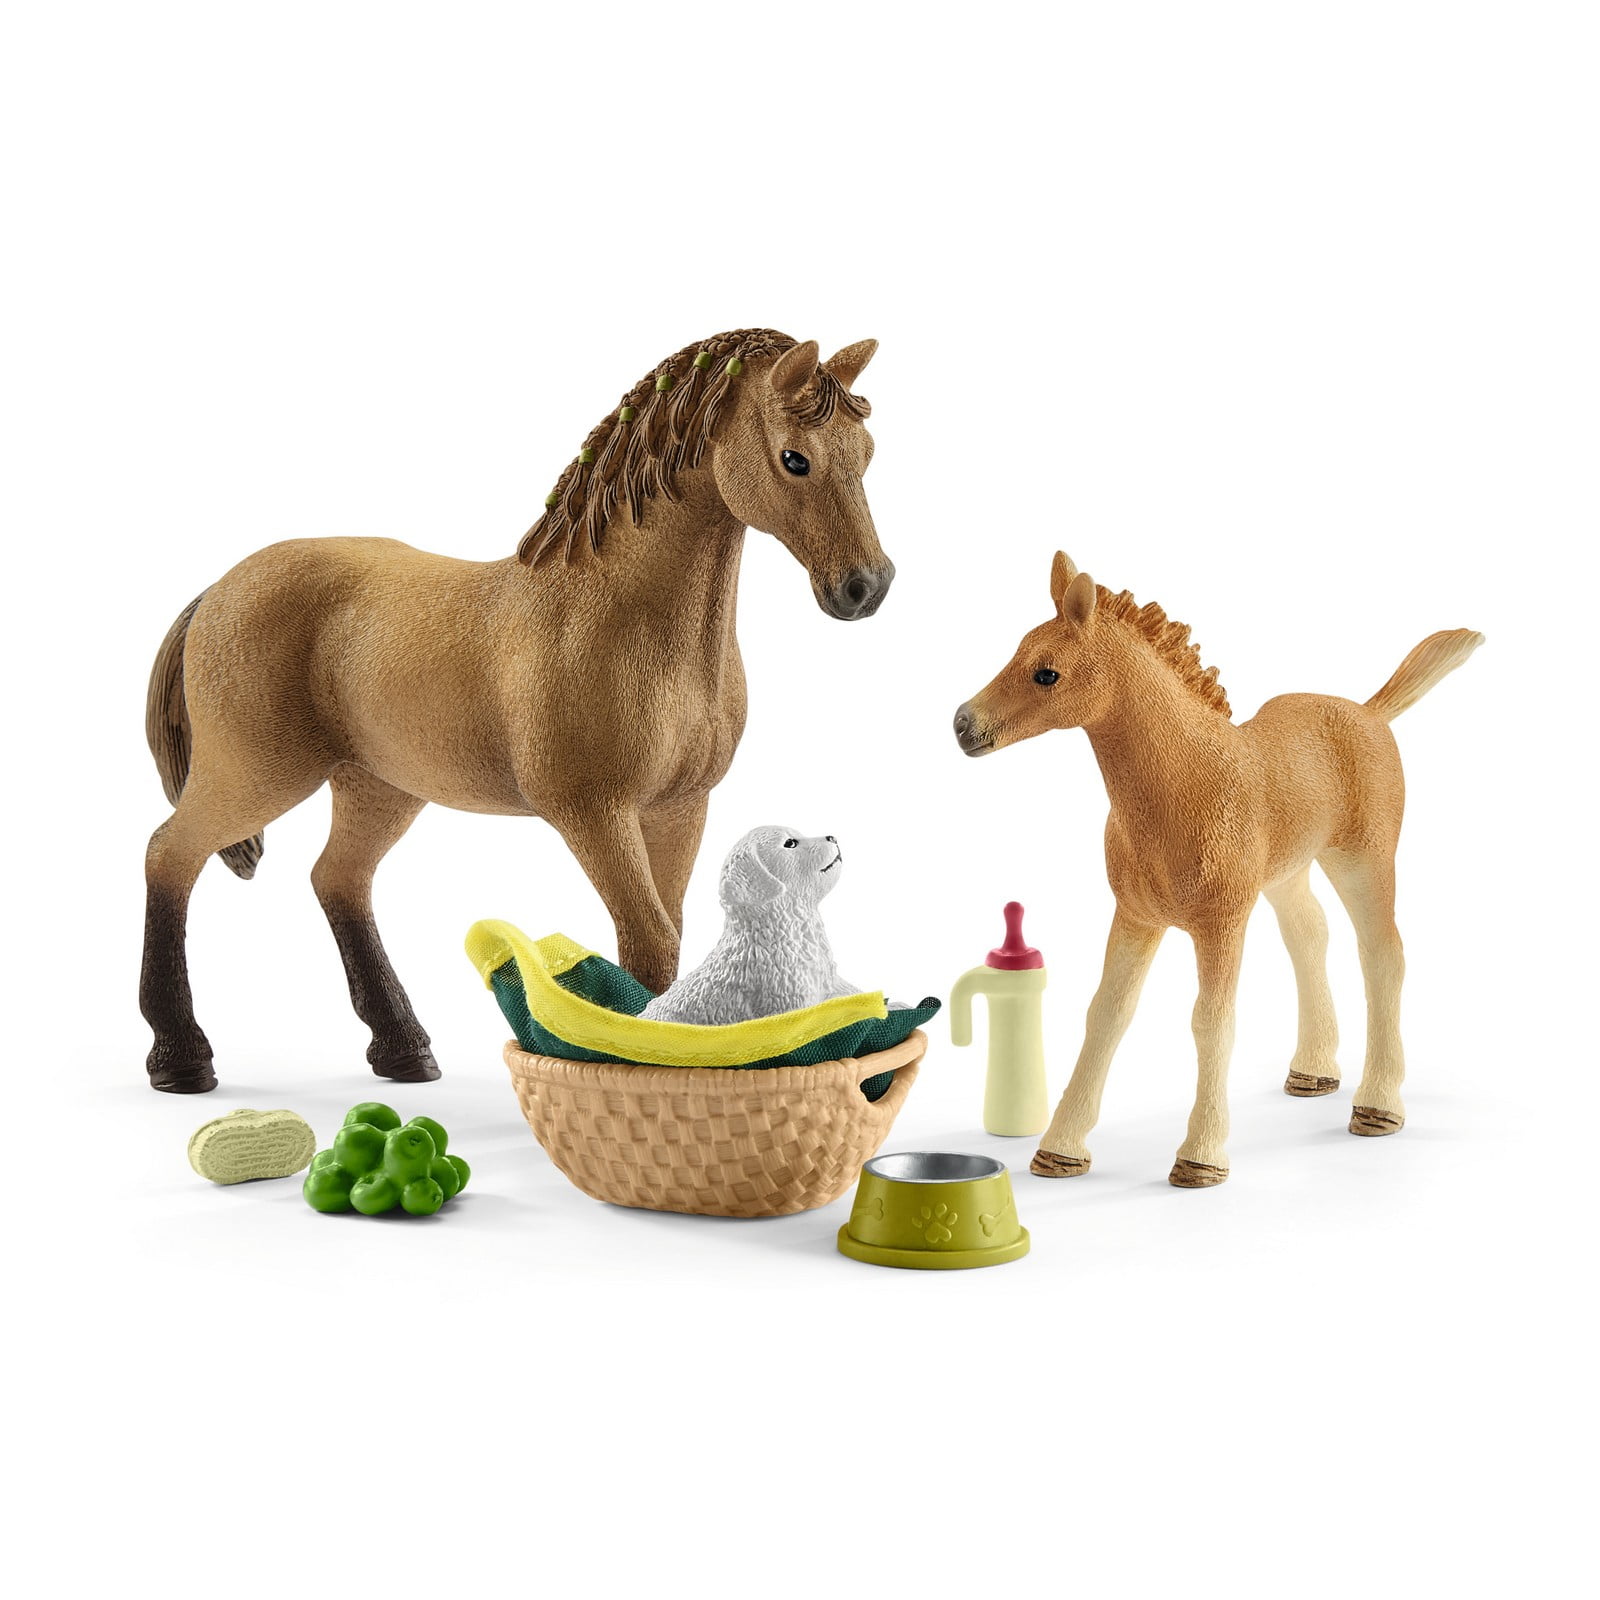 Schleich horses and other animals price per animal 